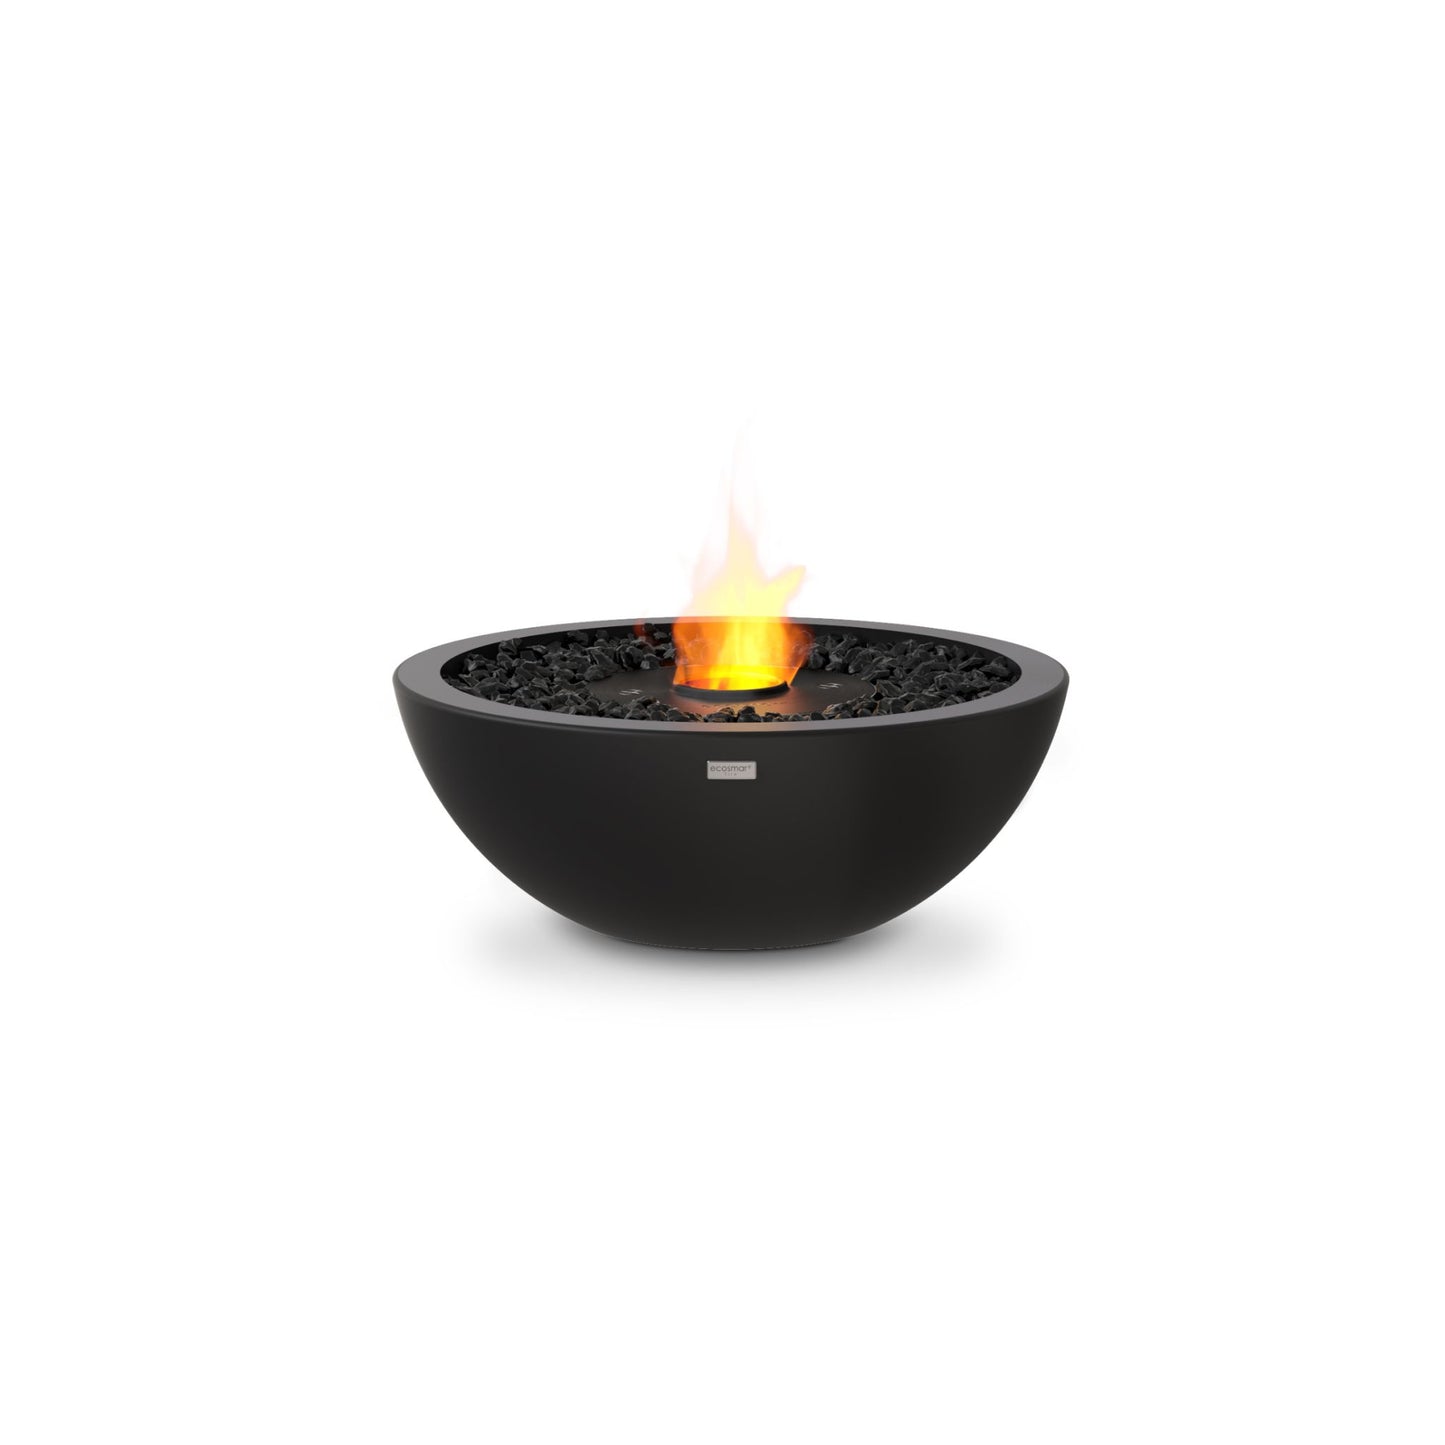 Ecosmart Fire Mix 600 bioethanol fire pit bowl in black concrete with black steel burner on a white background